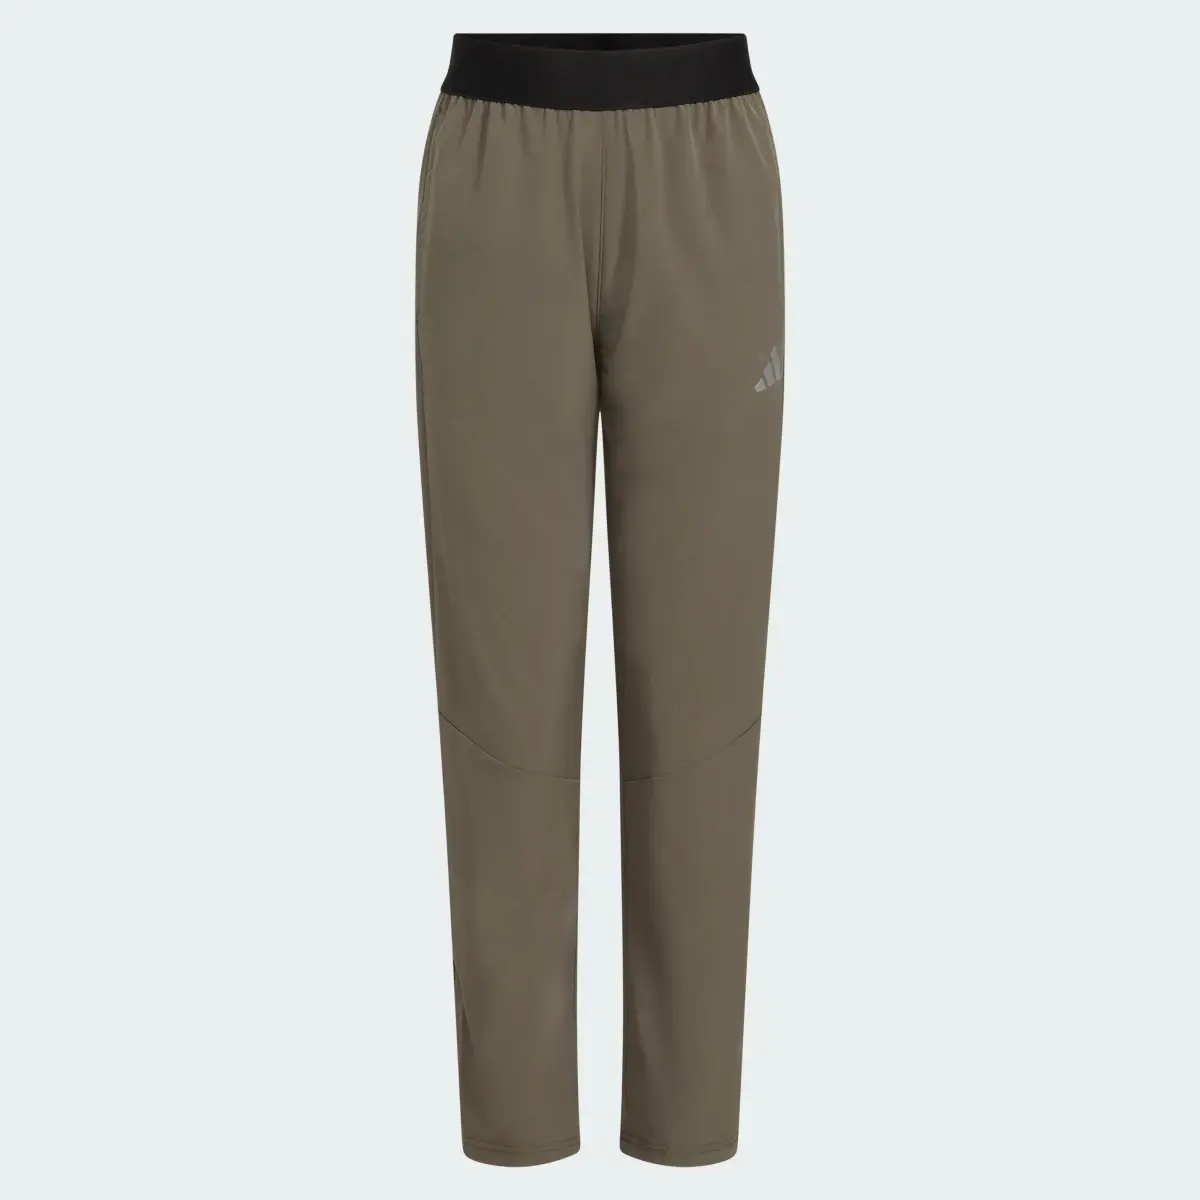 Adidas Designed for Training Stretch Woven Pants. 3